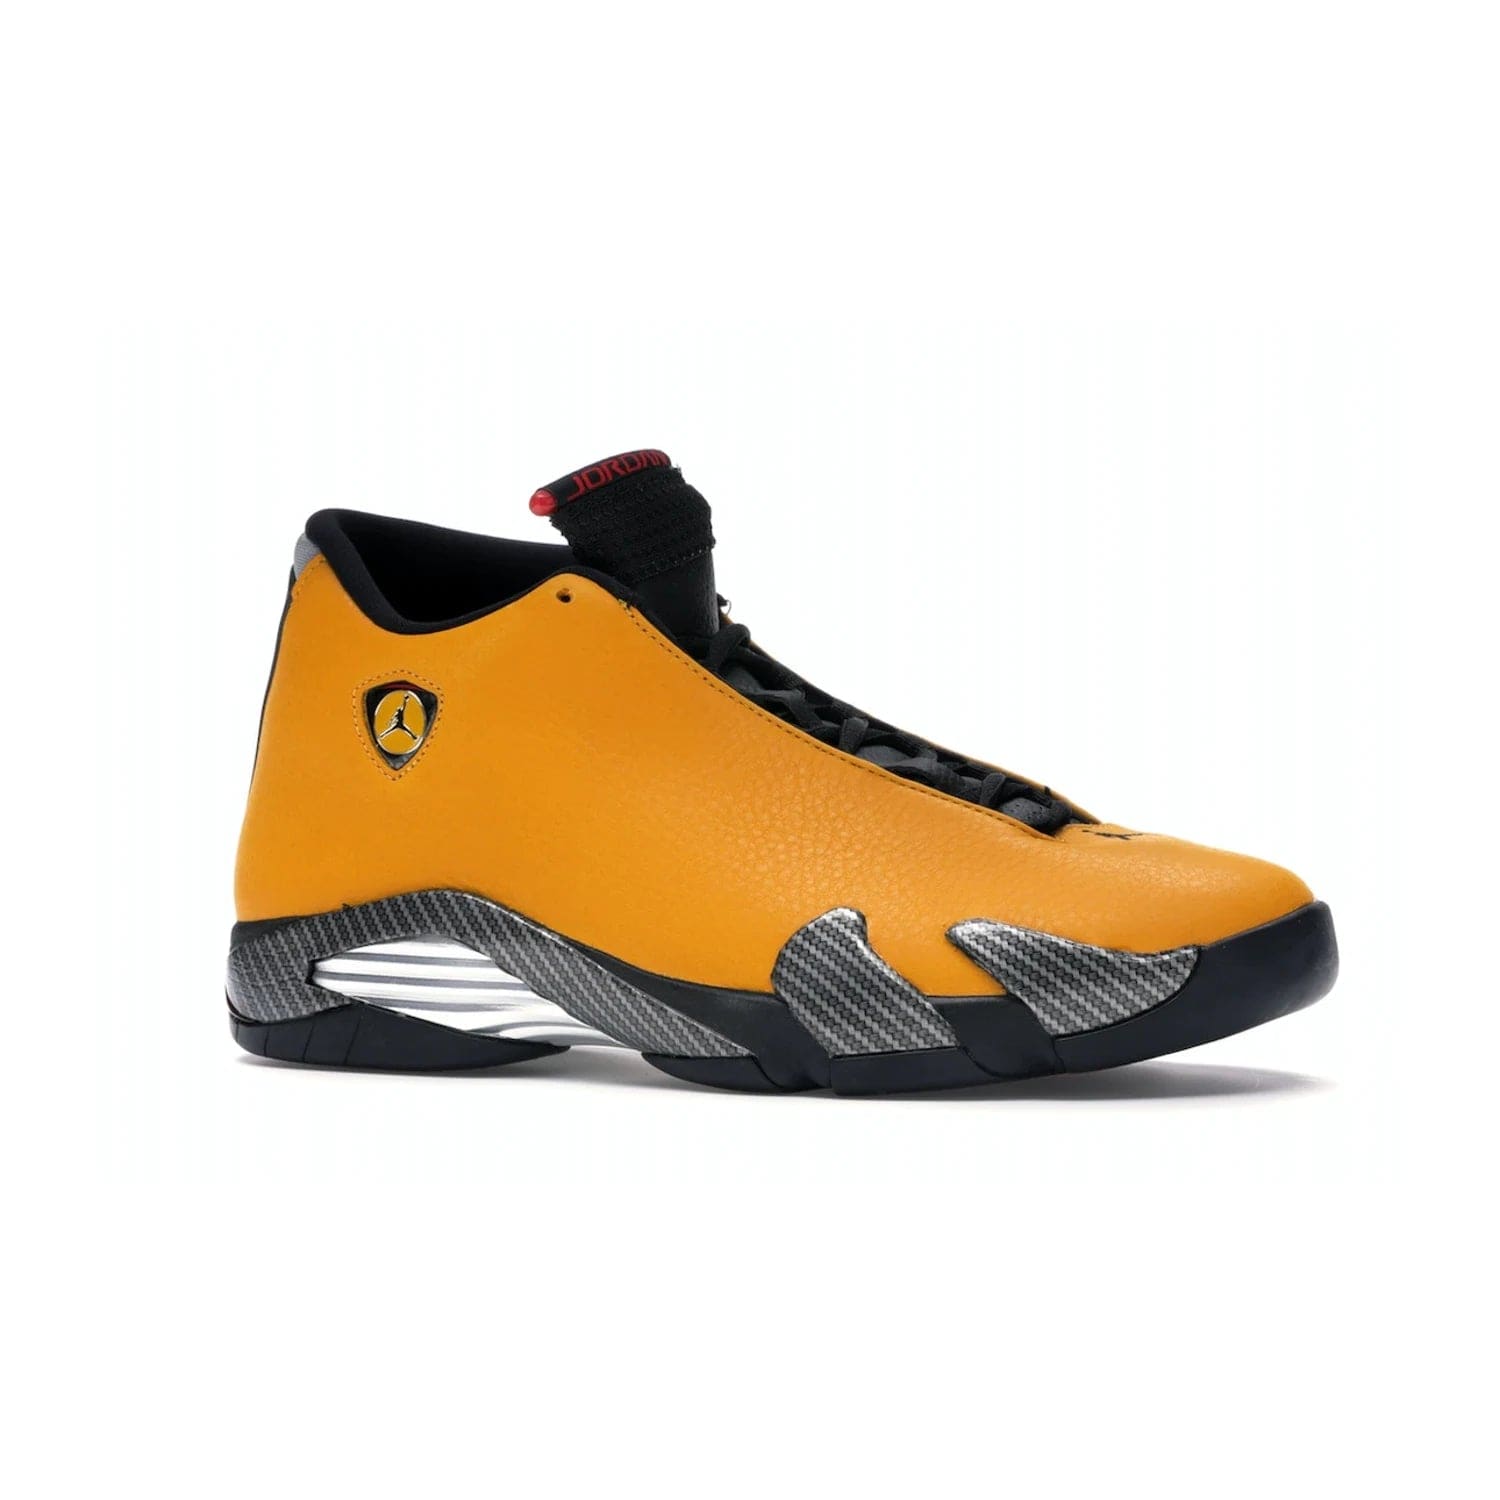 Jordan 14 Retro University Gold - Image 3 - Only at www.BallersClubKickz.com - Air Jordan 14 Retro University Gold: High-quality leather sneaker with Jumpman, tongue & heel logos. Zoom Air units & herringbone traction for superior comfort. University Gold outsole for stylish streetwear.